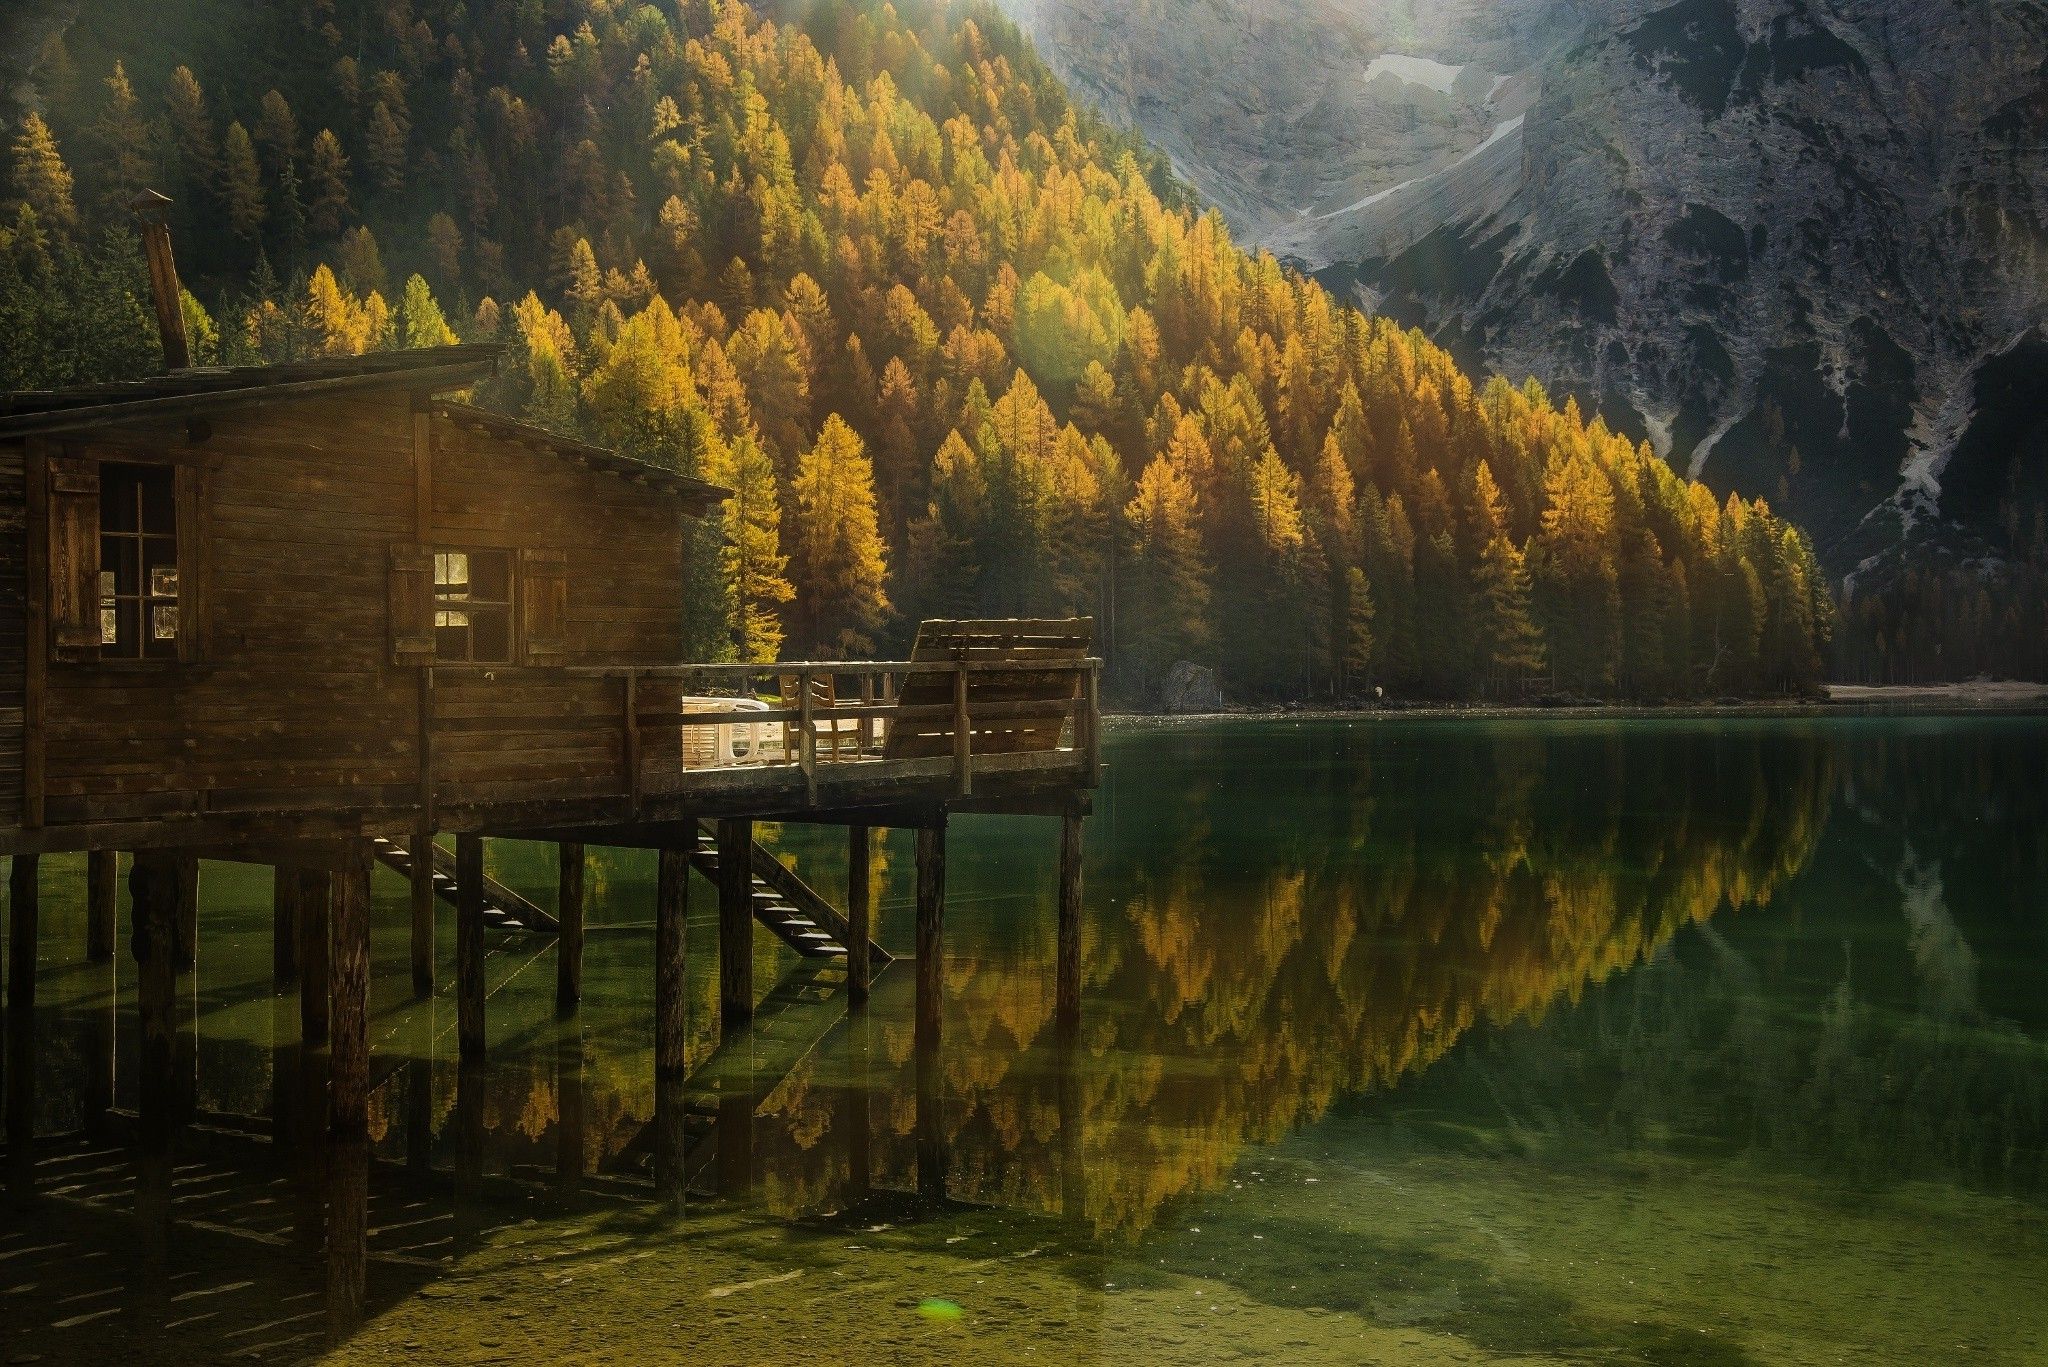 landscape, Nature, Fall, Forest, Mountain, Lake, Cabin, Reflection, Sunlight, Italy Wallpaper HD / Desktop and Mobile Background